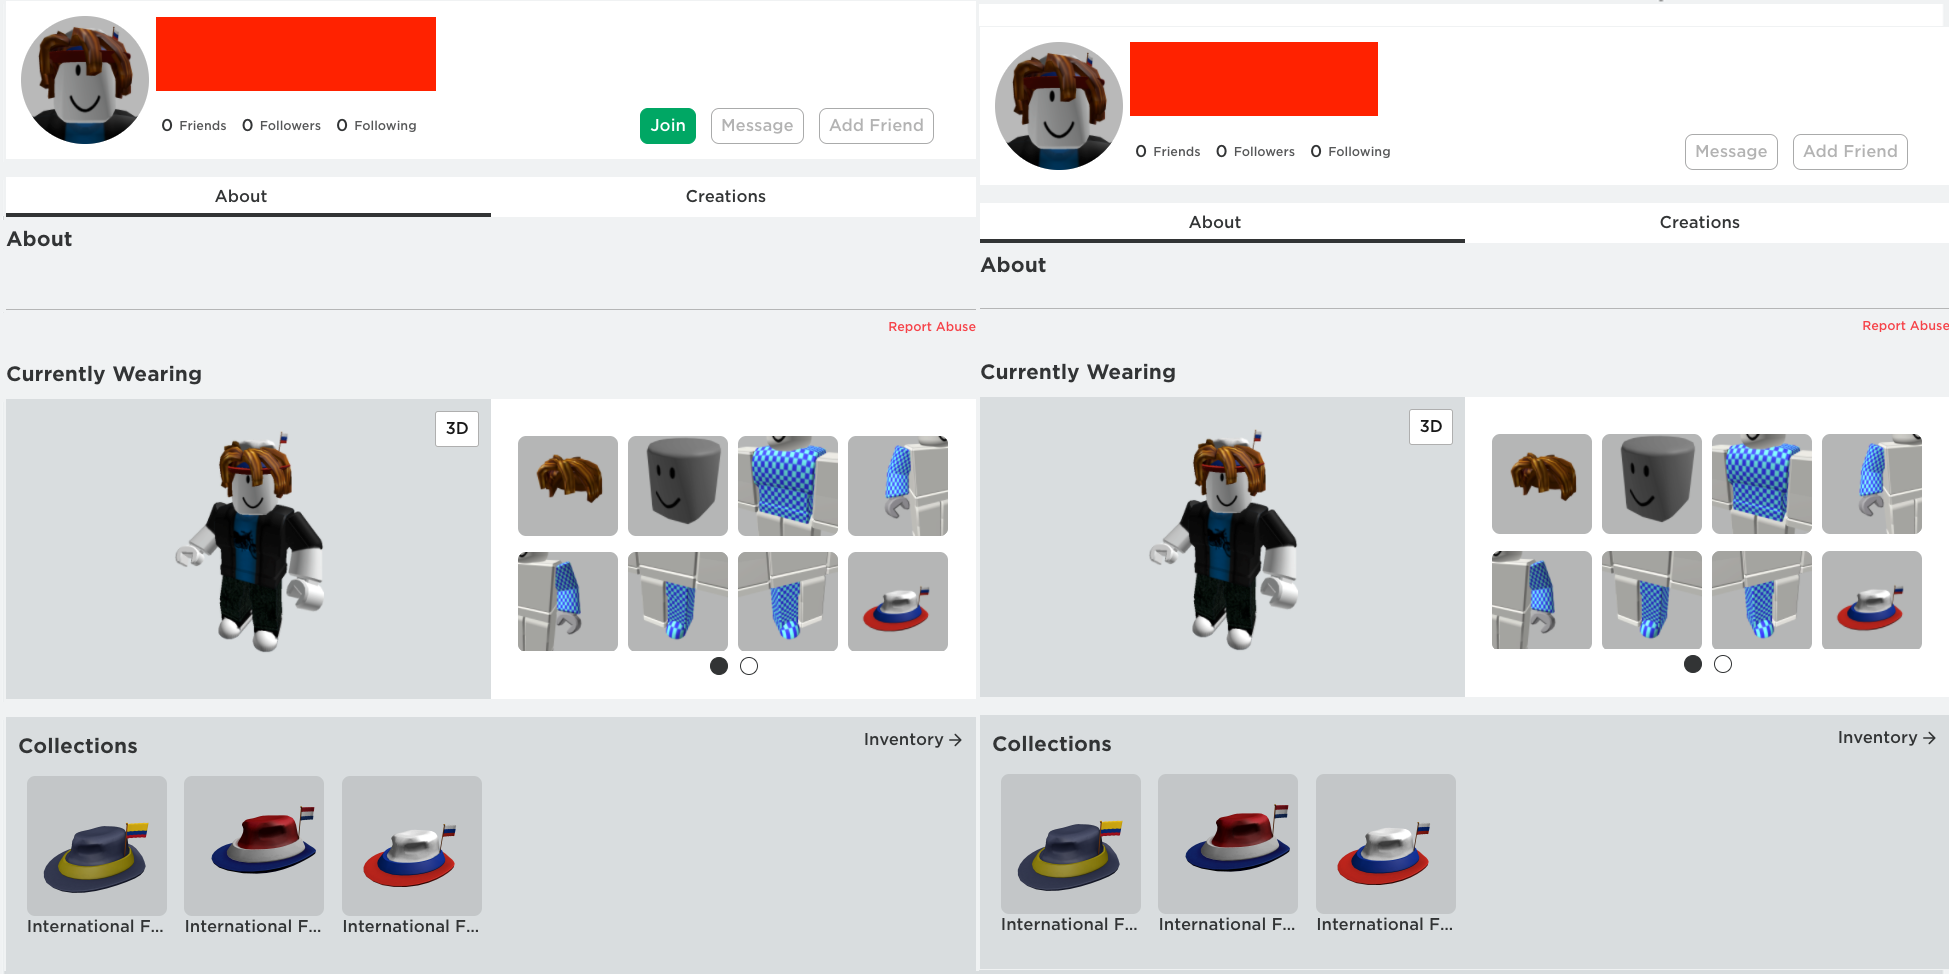 Whats wrong with roblox (i've tried removing extensions, swapping profiles  did work but I want to use this profile specifically : r/RobloxHelp